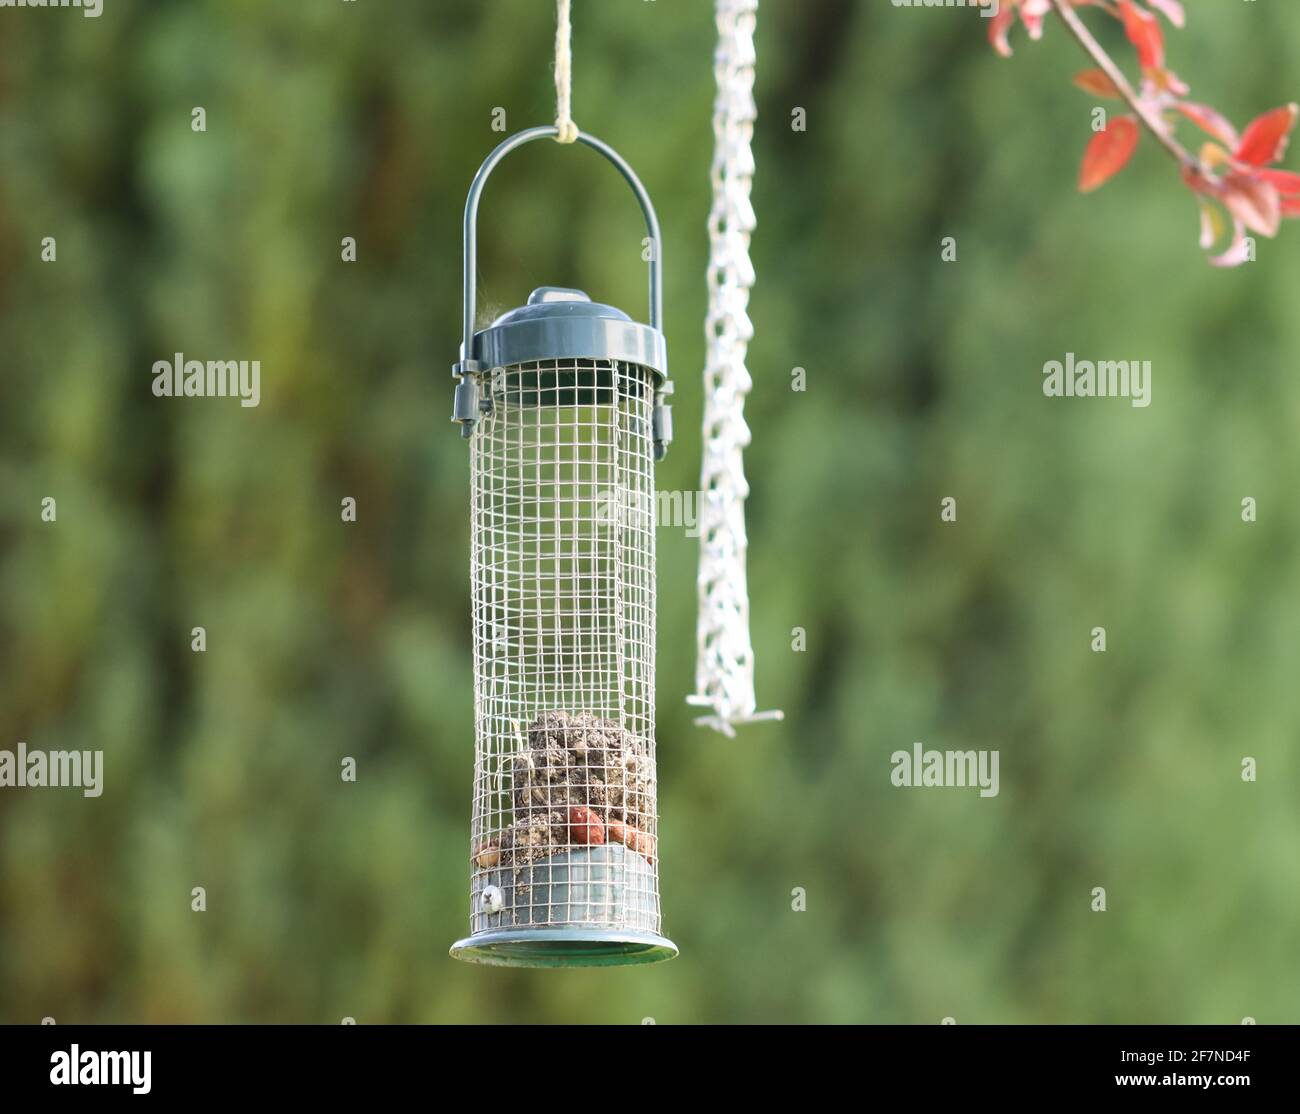 Bird feed hanging off a tree in the garden on a blurred green background Stock Photo